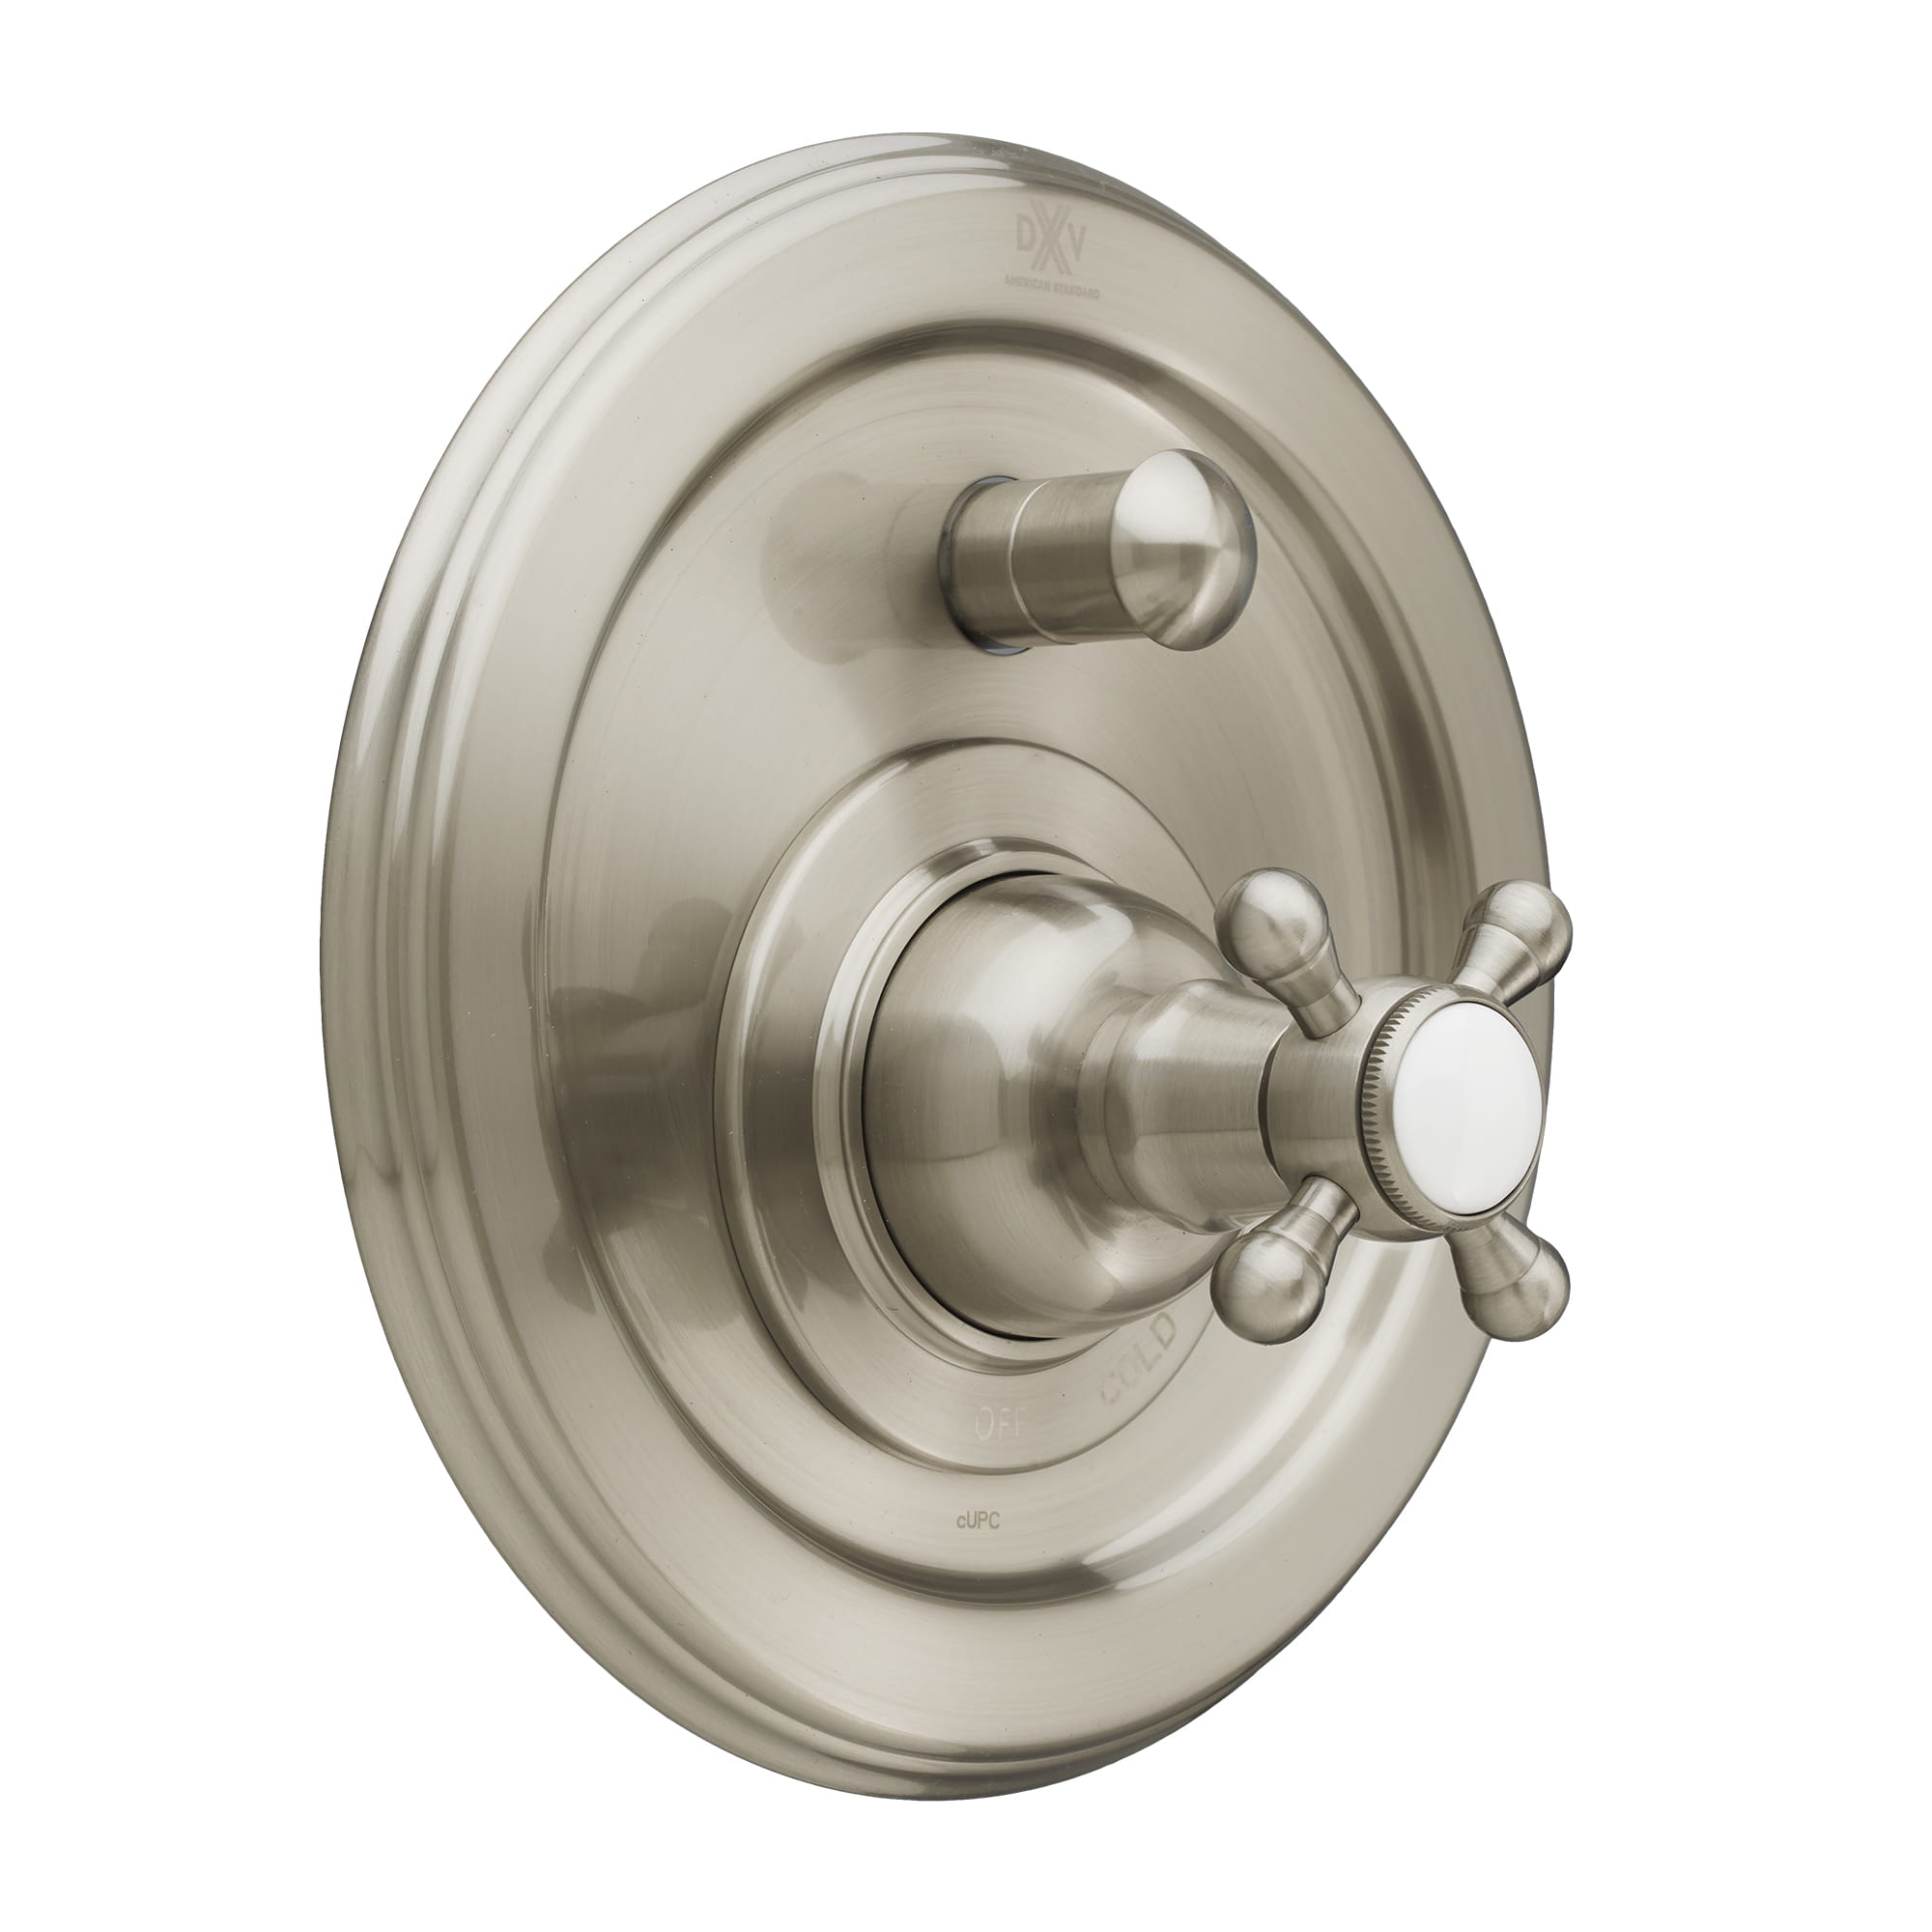 Pressure Balance Tub/Shower Valve Trim with Diveter and Cross Handle